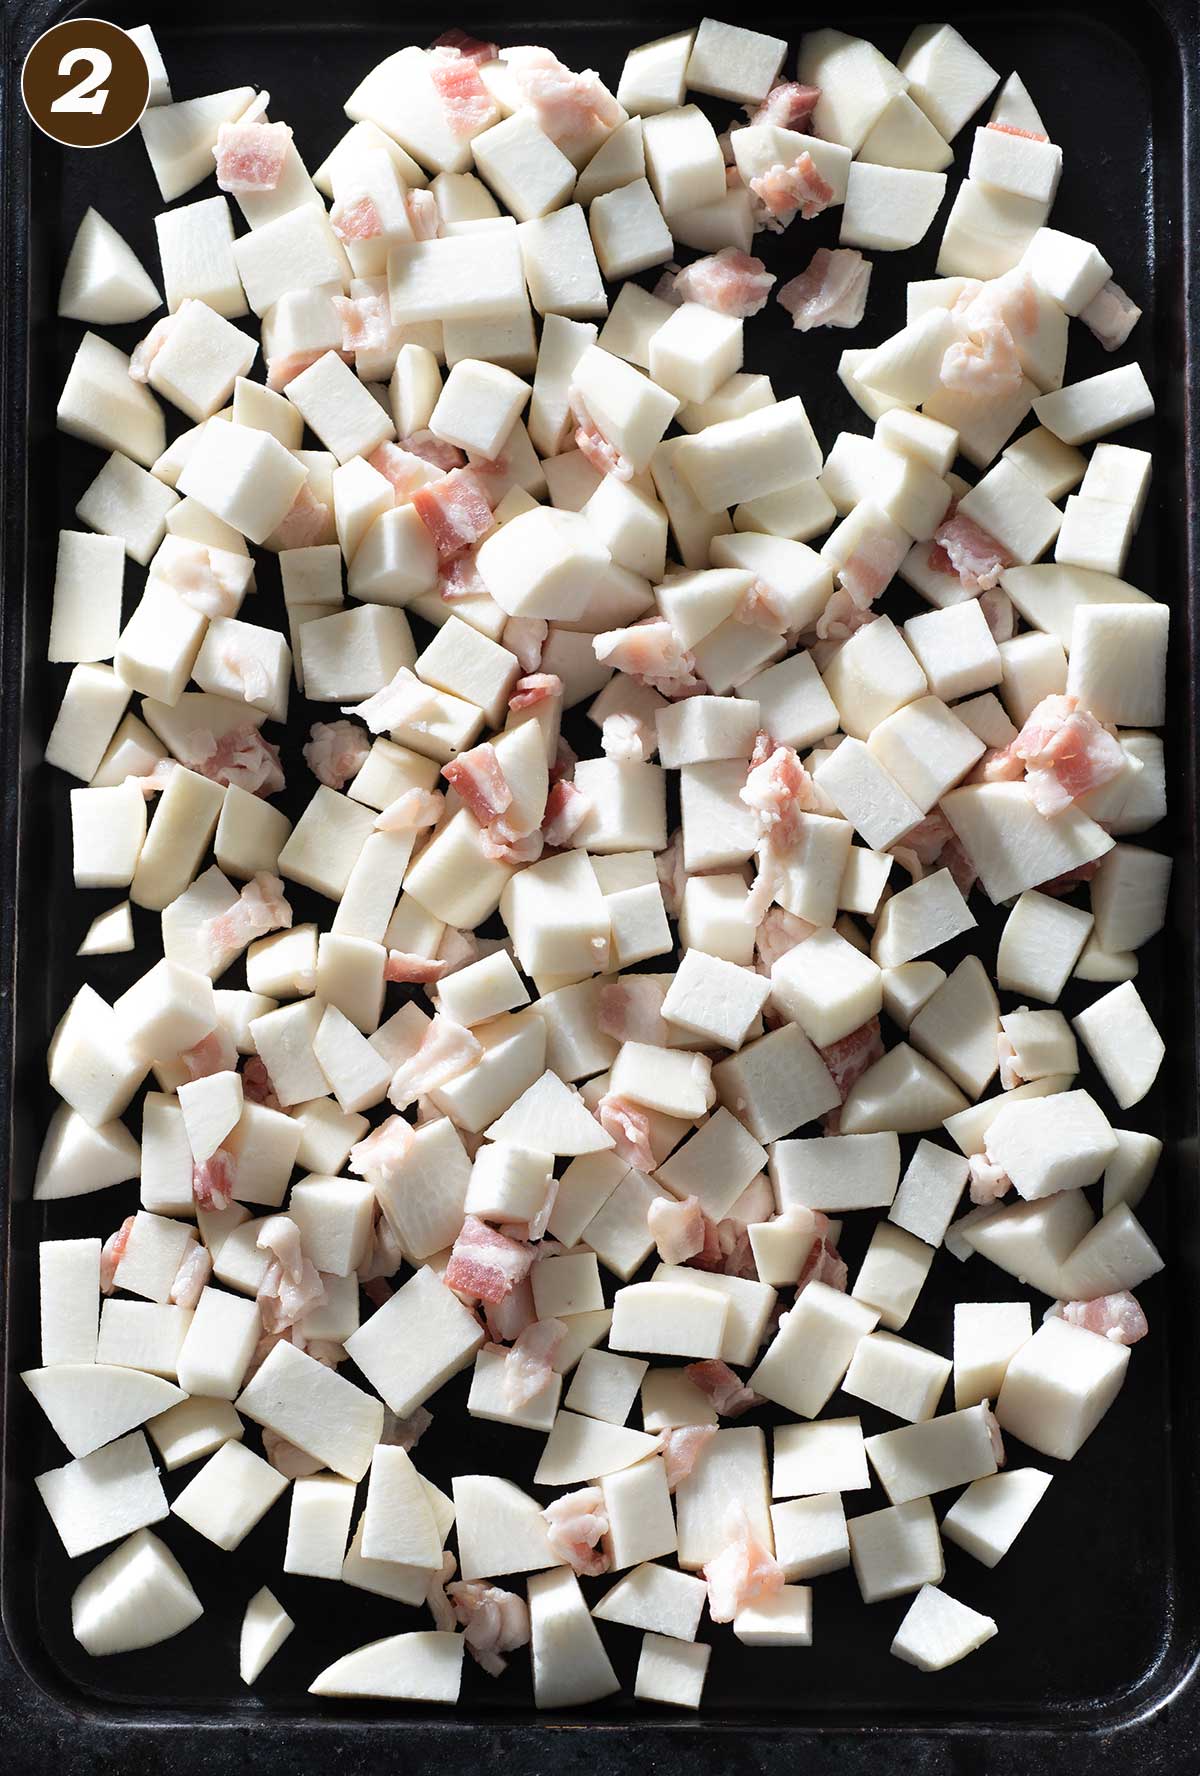 Diced turnip and bacon on a baking sheet.